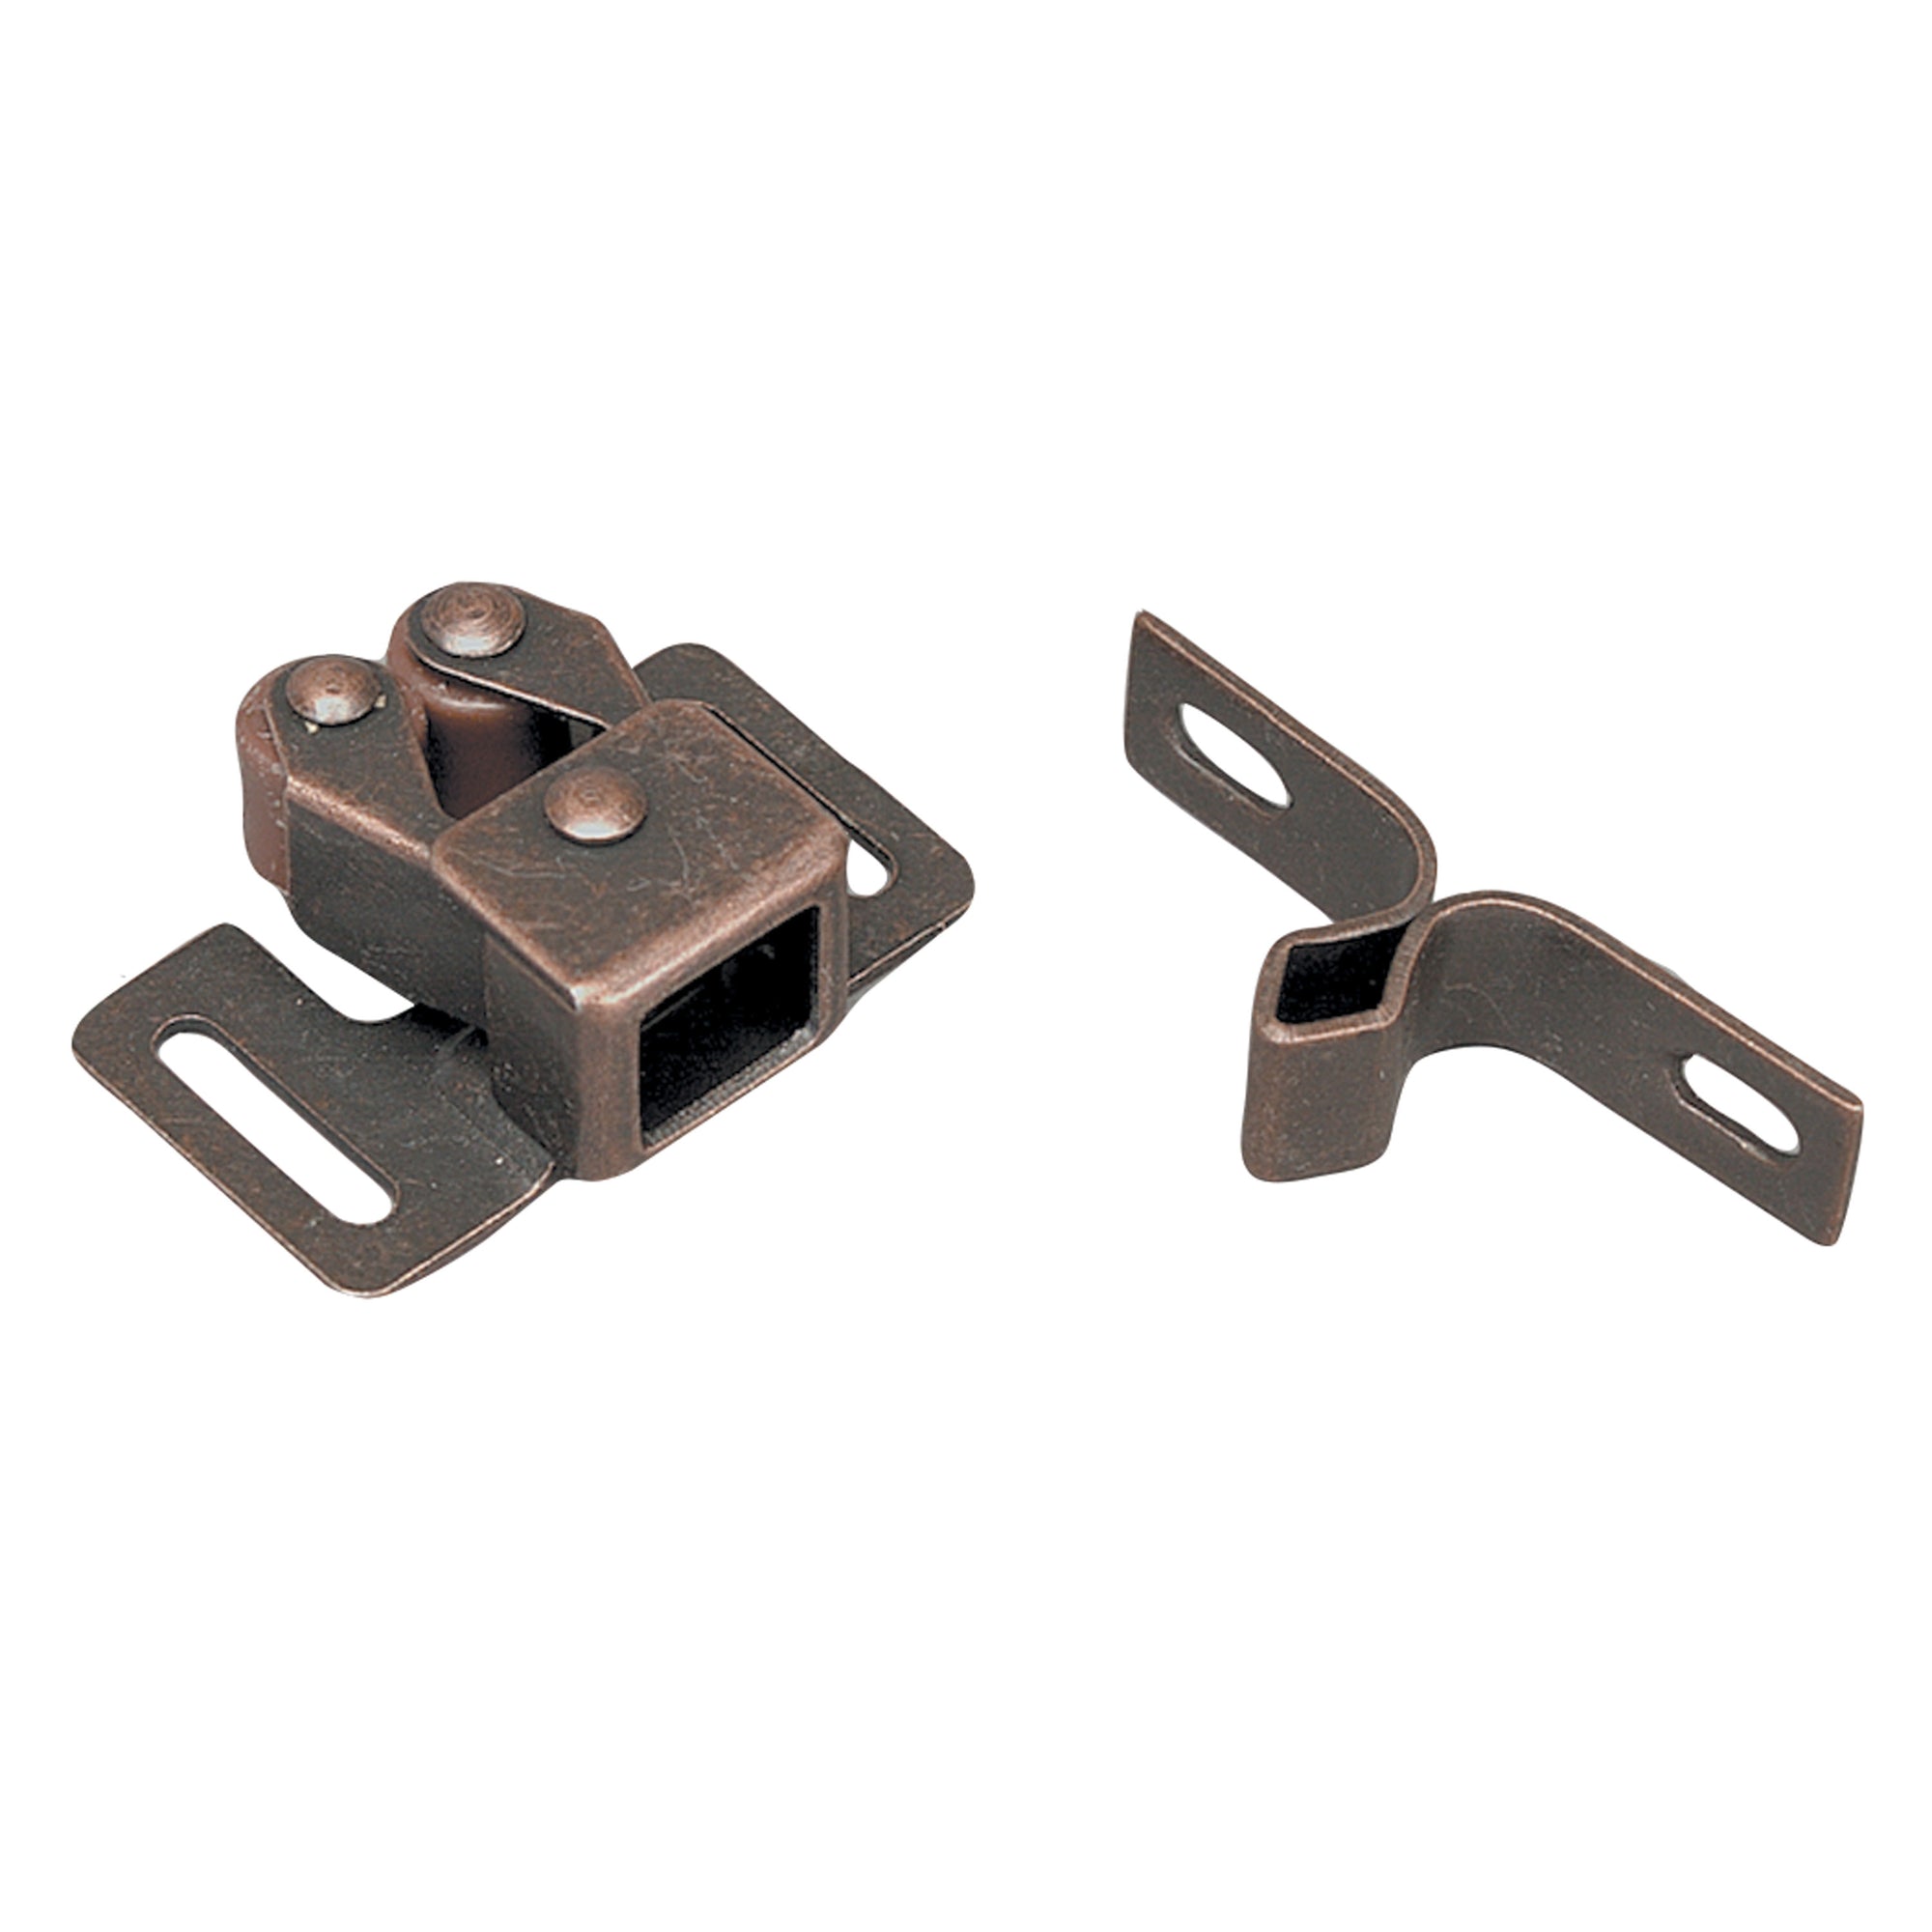 AP Products 013-006-1 Double Roller Catch